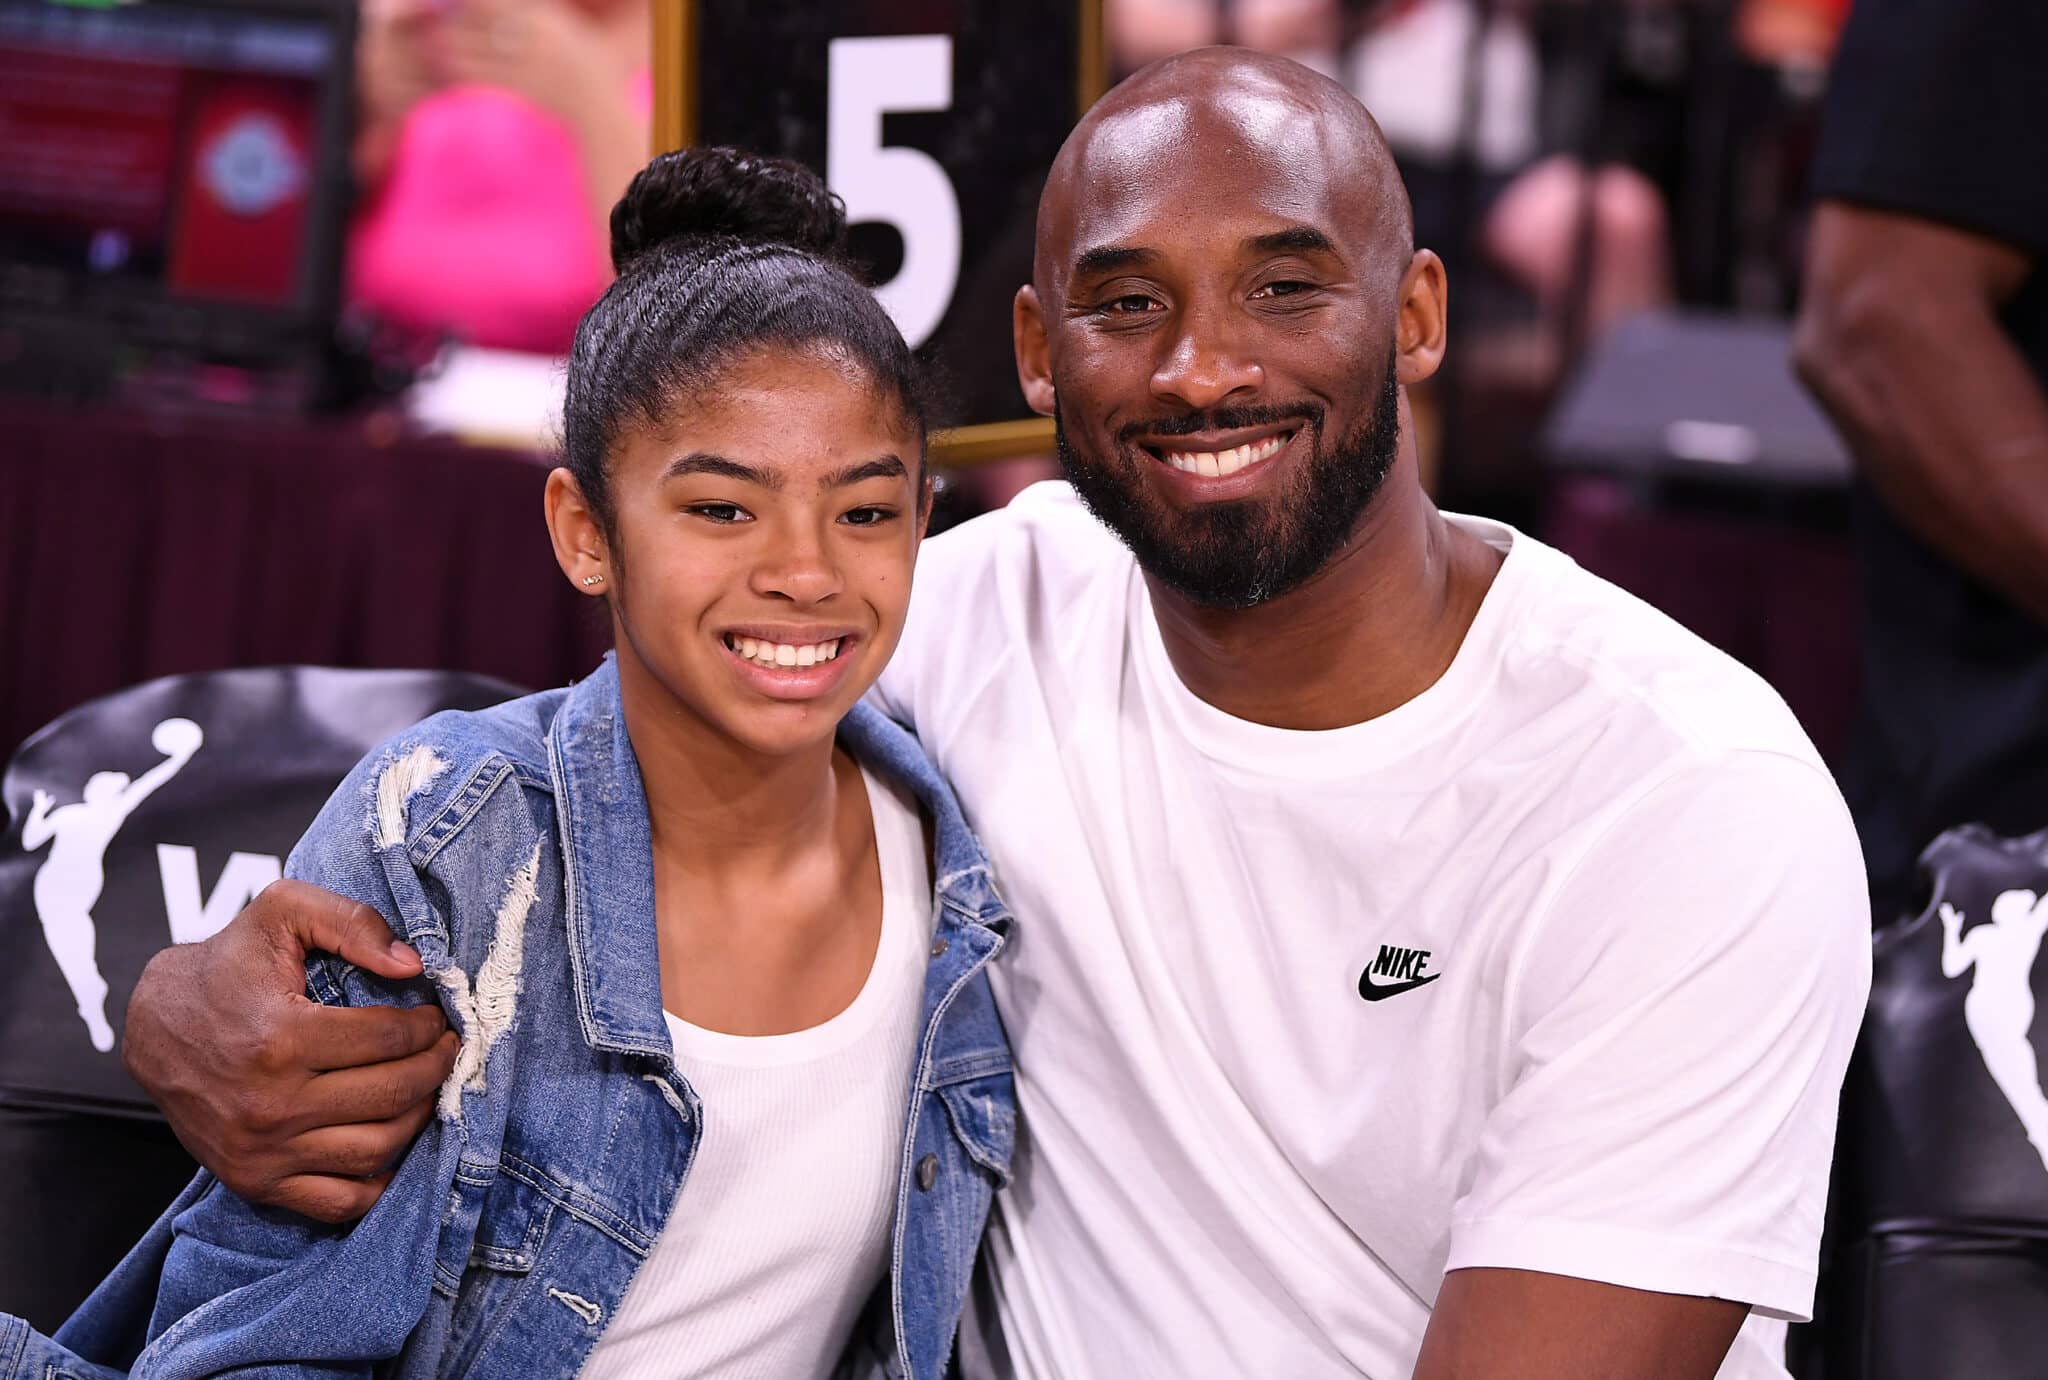 NBA star Kobe Bryant steps out with his three daughtersand they